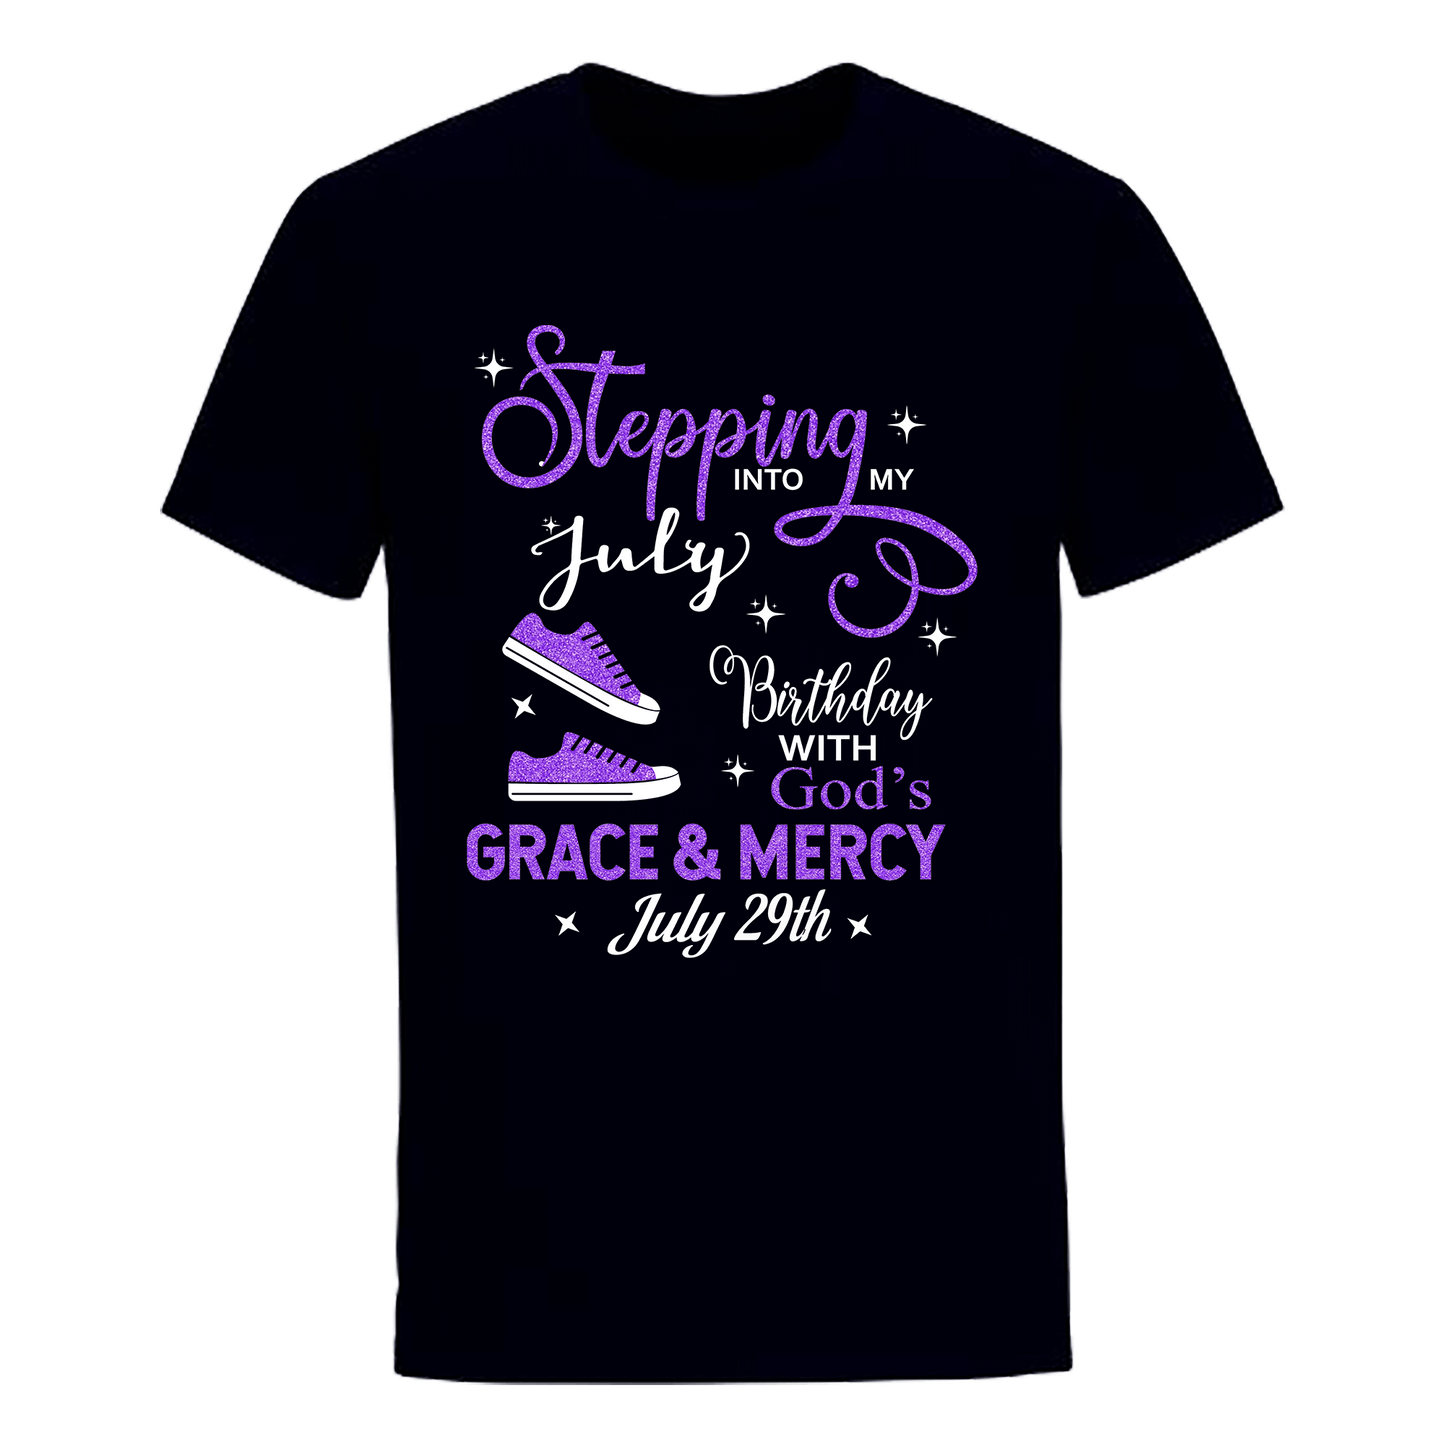 JULY 29 GRACE AND MERCY